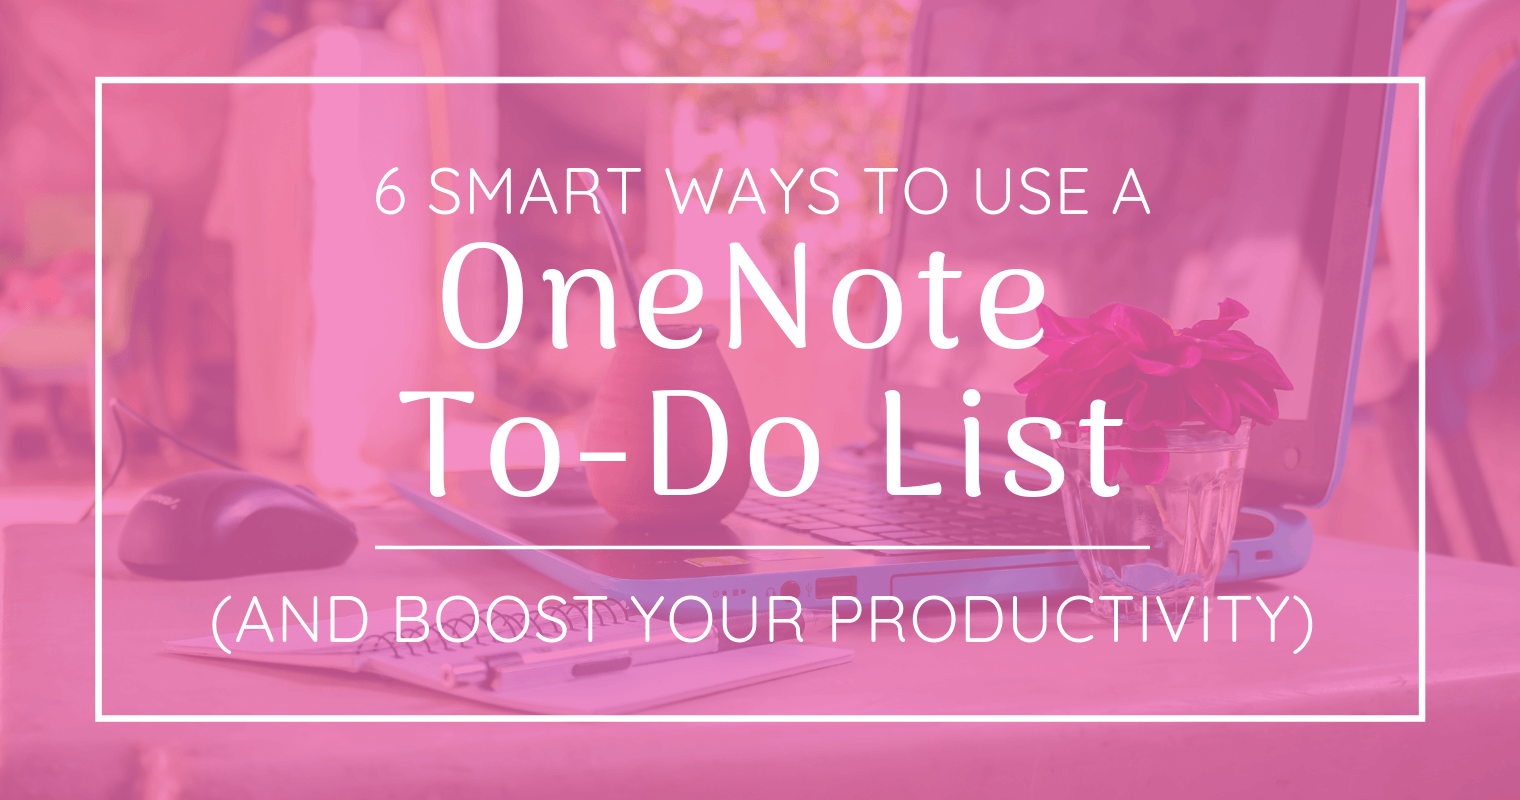 A OneNote to-do list is one of the simplest ways to increase your productivity. Here's how I use mine to get things done, even as a busy mom.